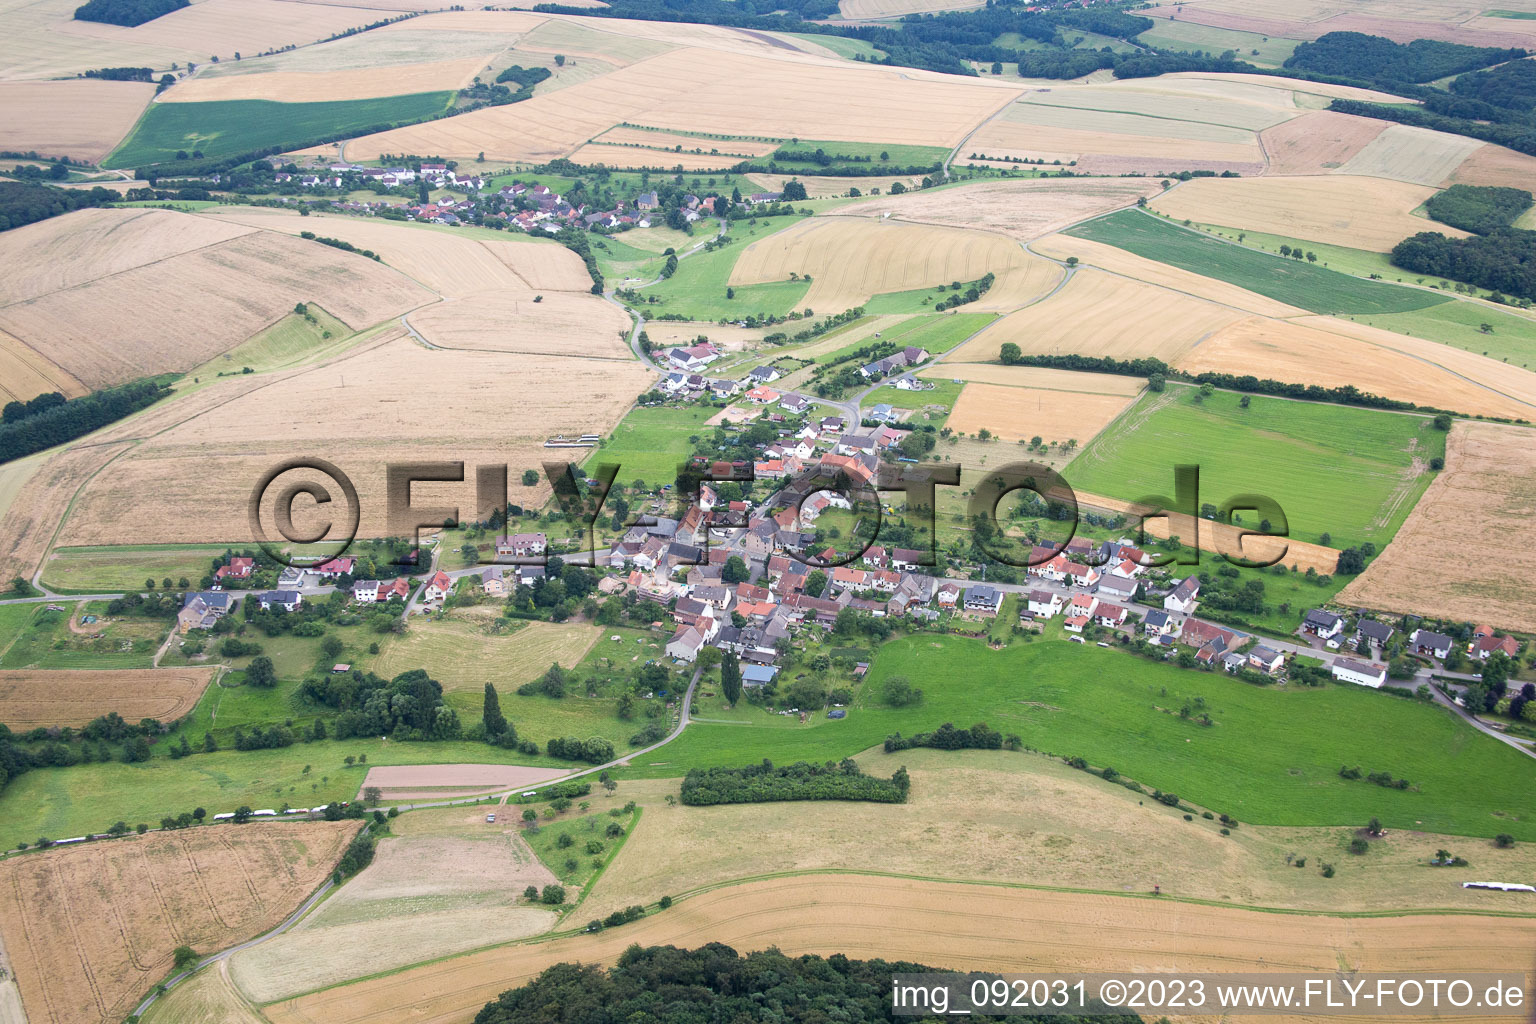 Aerial photograpy of Homberg in the state Rhineland-Palatinate, Germany